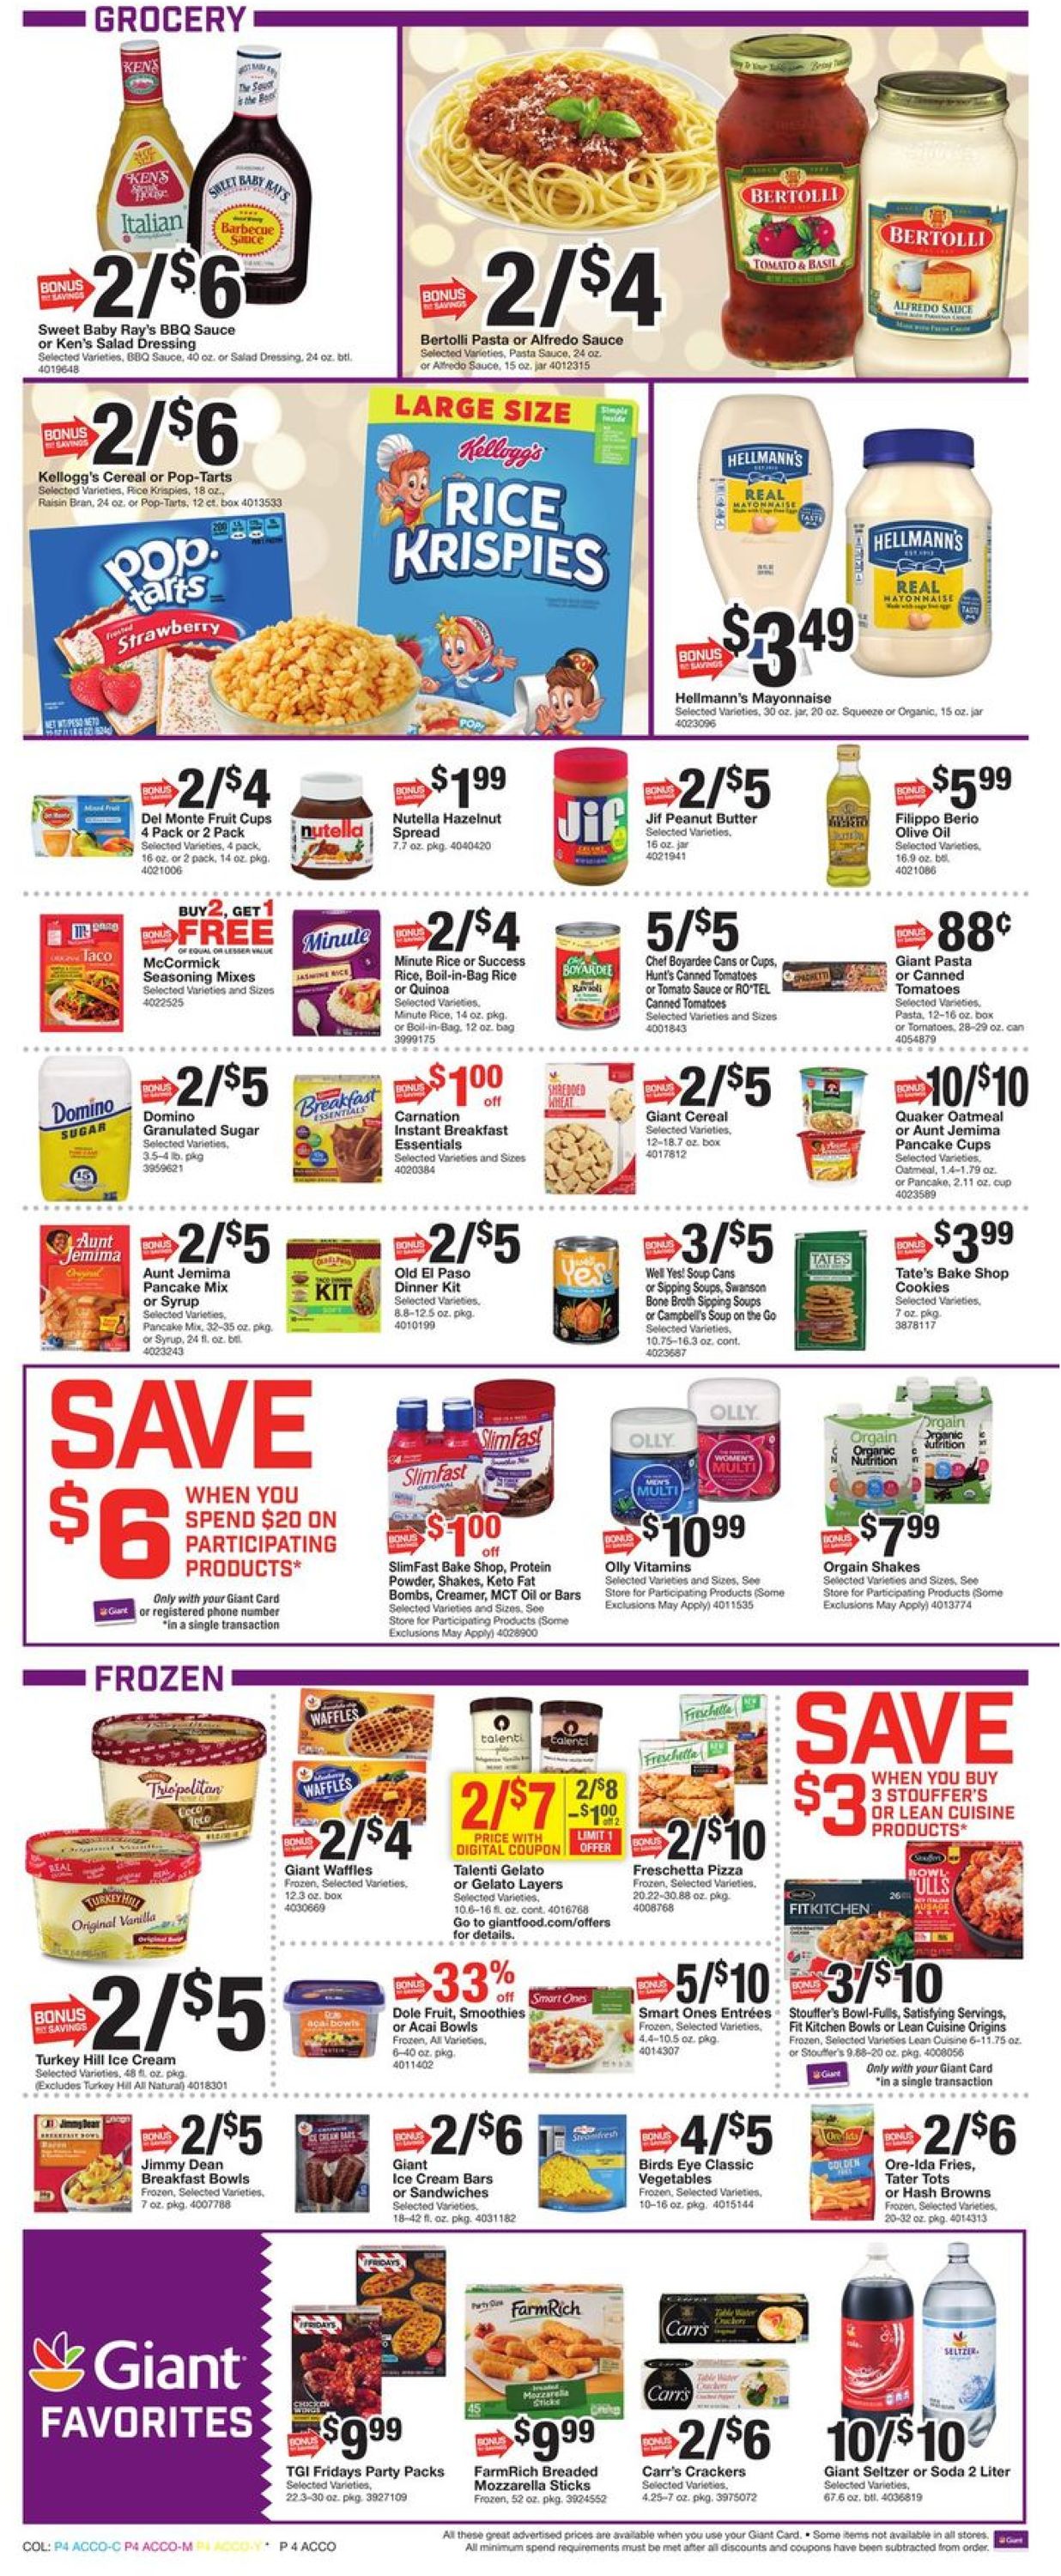 Catalogue Giant Food - New Year's Ad 2019/2020 from 12/27/2019